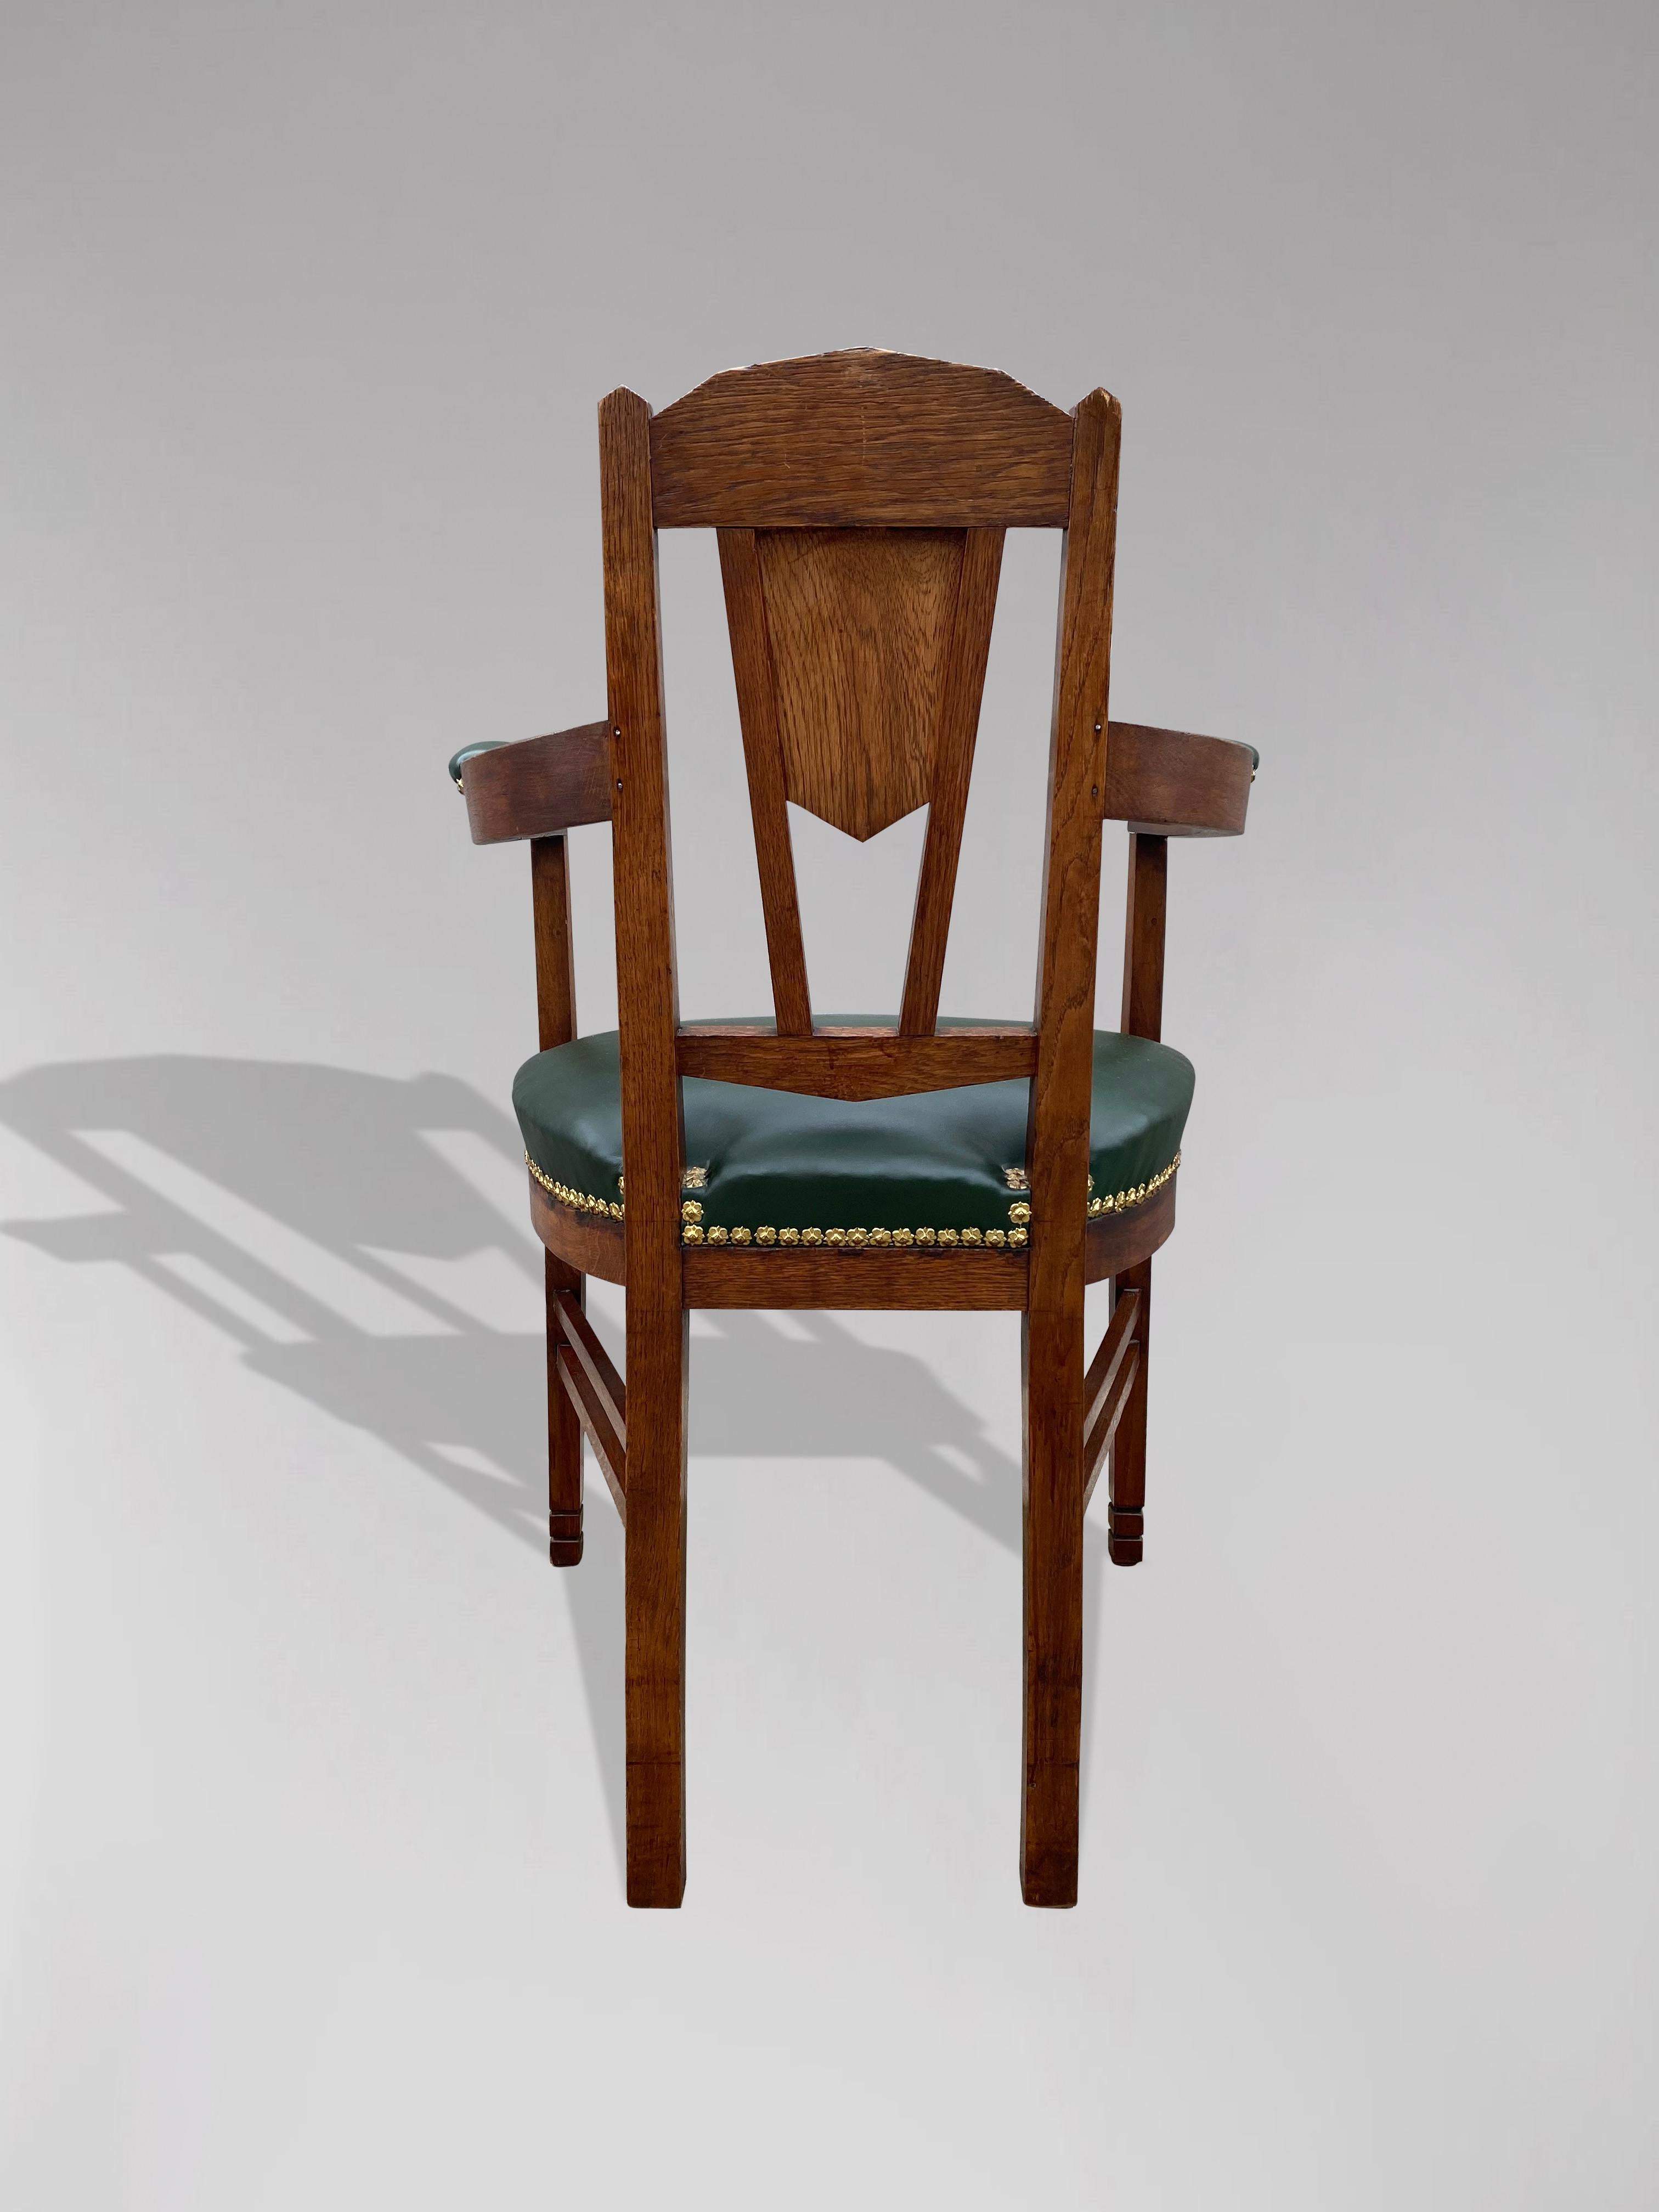 Arts & Crafts Art Nouveau Oak Armchair in the Style of Gustave Serrurier Bovy In Good Condition In Petworth,West Sussex, GB